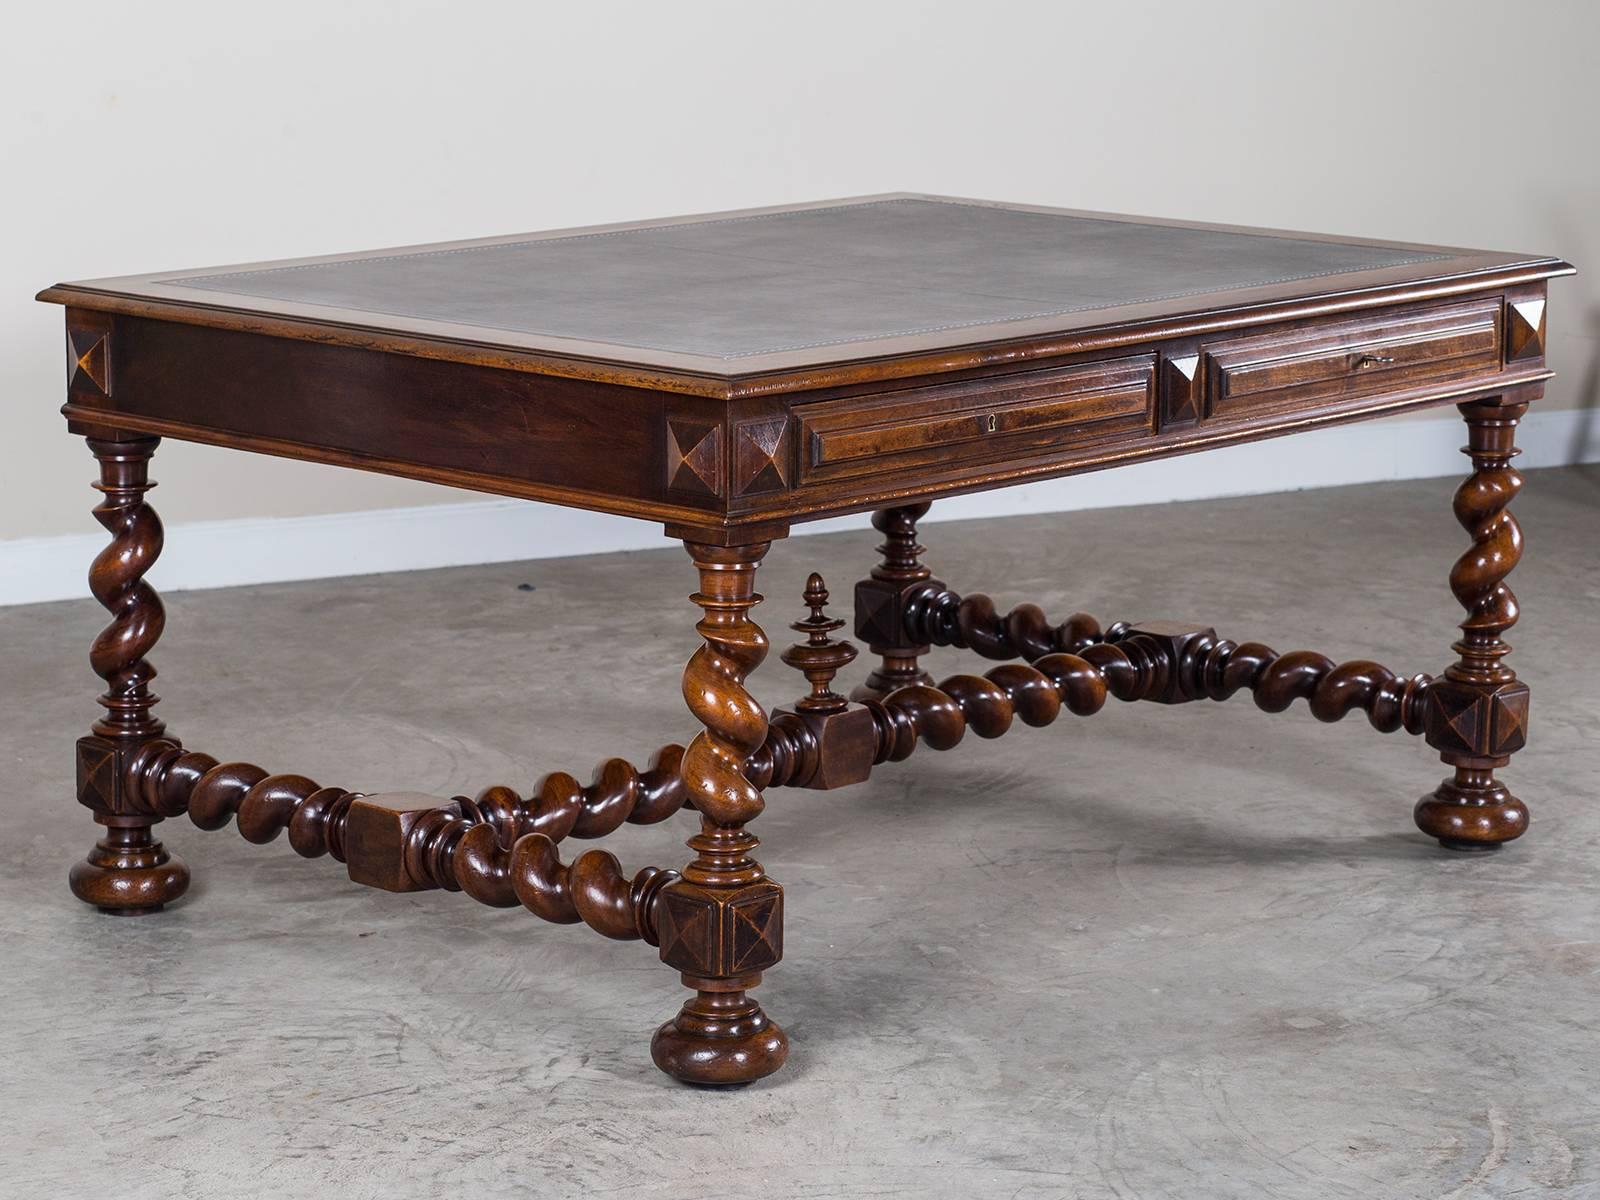 Receive our new selections direct from 1stdibs by email each week. Please click “Follow Dealer” button below and see them first!

The grand scale of this antique French walnut partners table desk, circa 1880 is quite impressive. Modeled after the